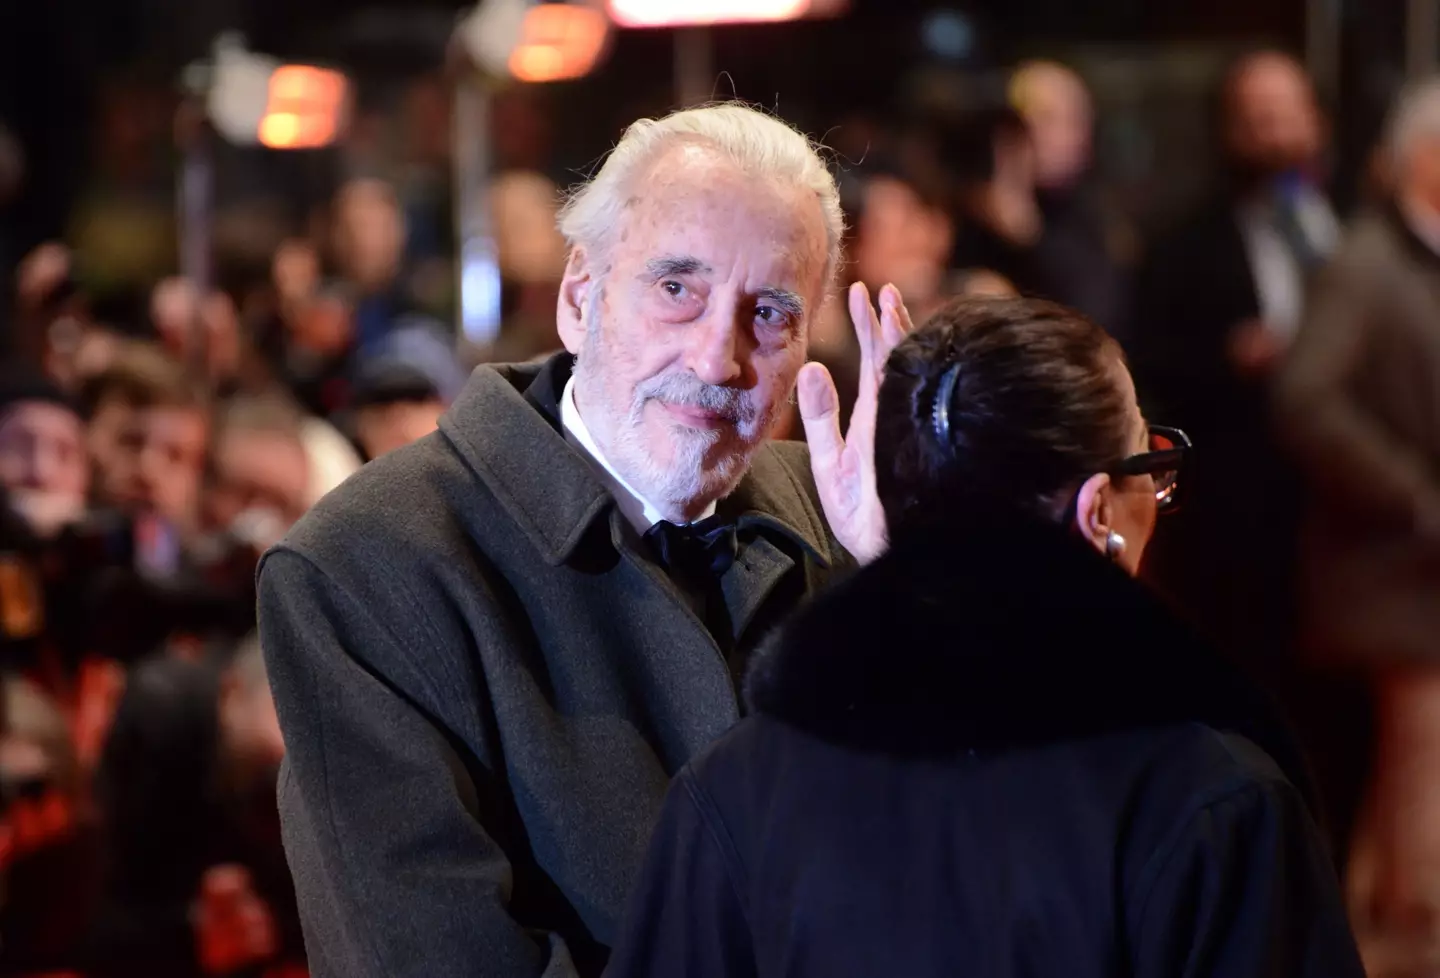 In his 93 years in this world, Sir Christopher Lee lived a life most could only dream of.